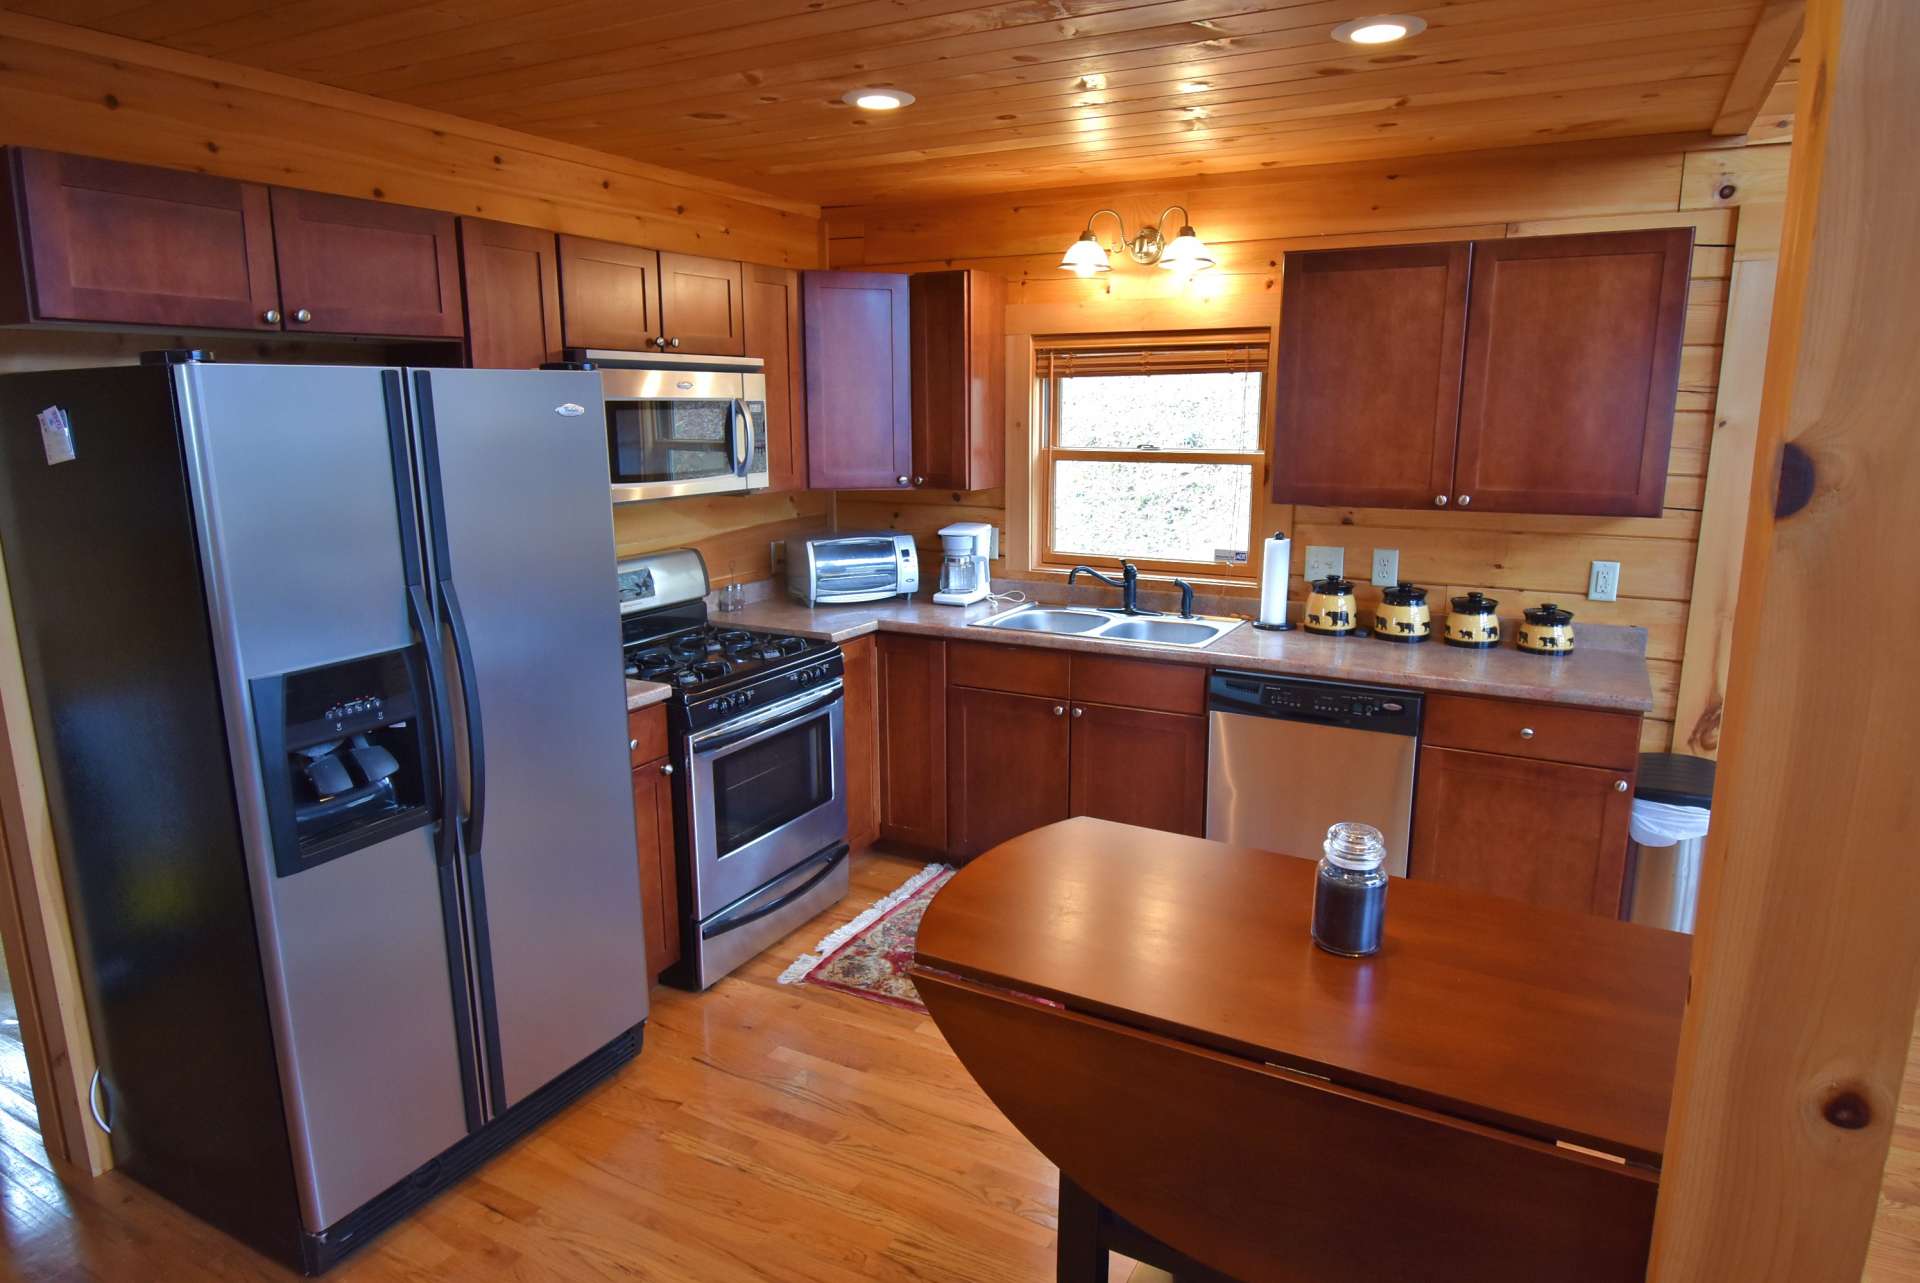 The kitchen is well appointed and offers ample work and storage space.